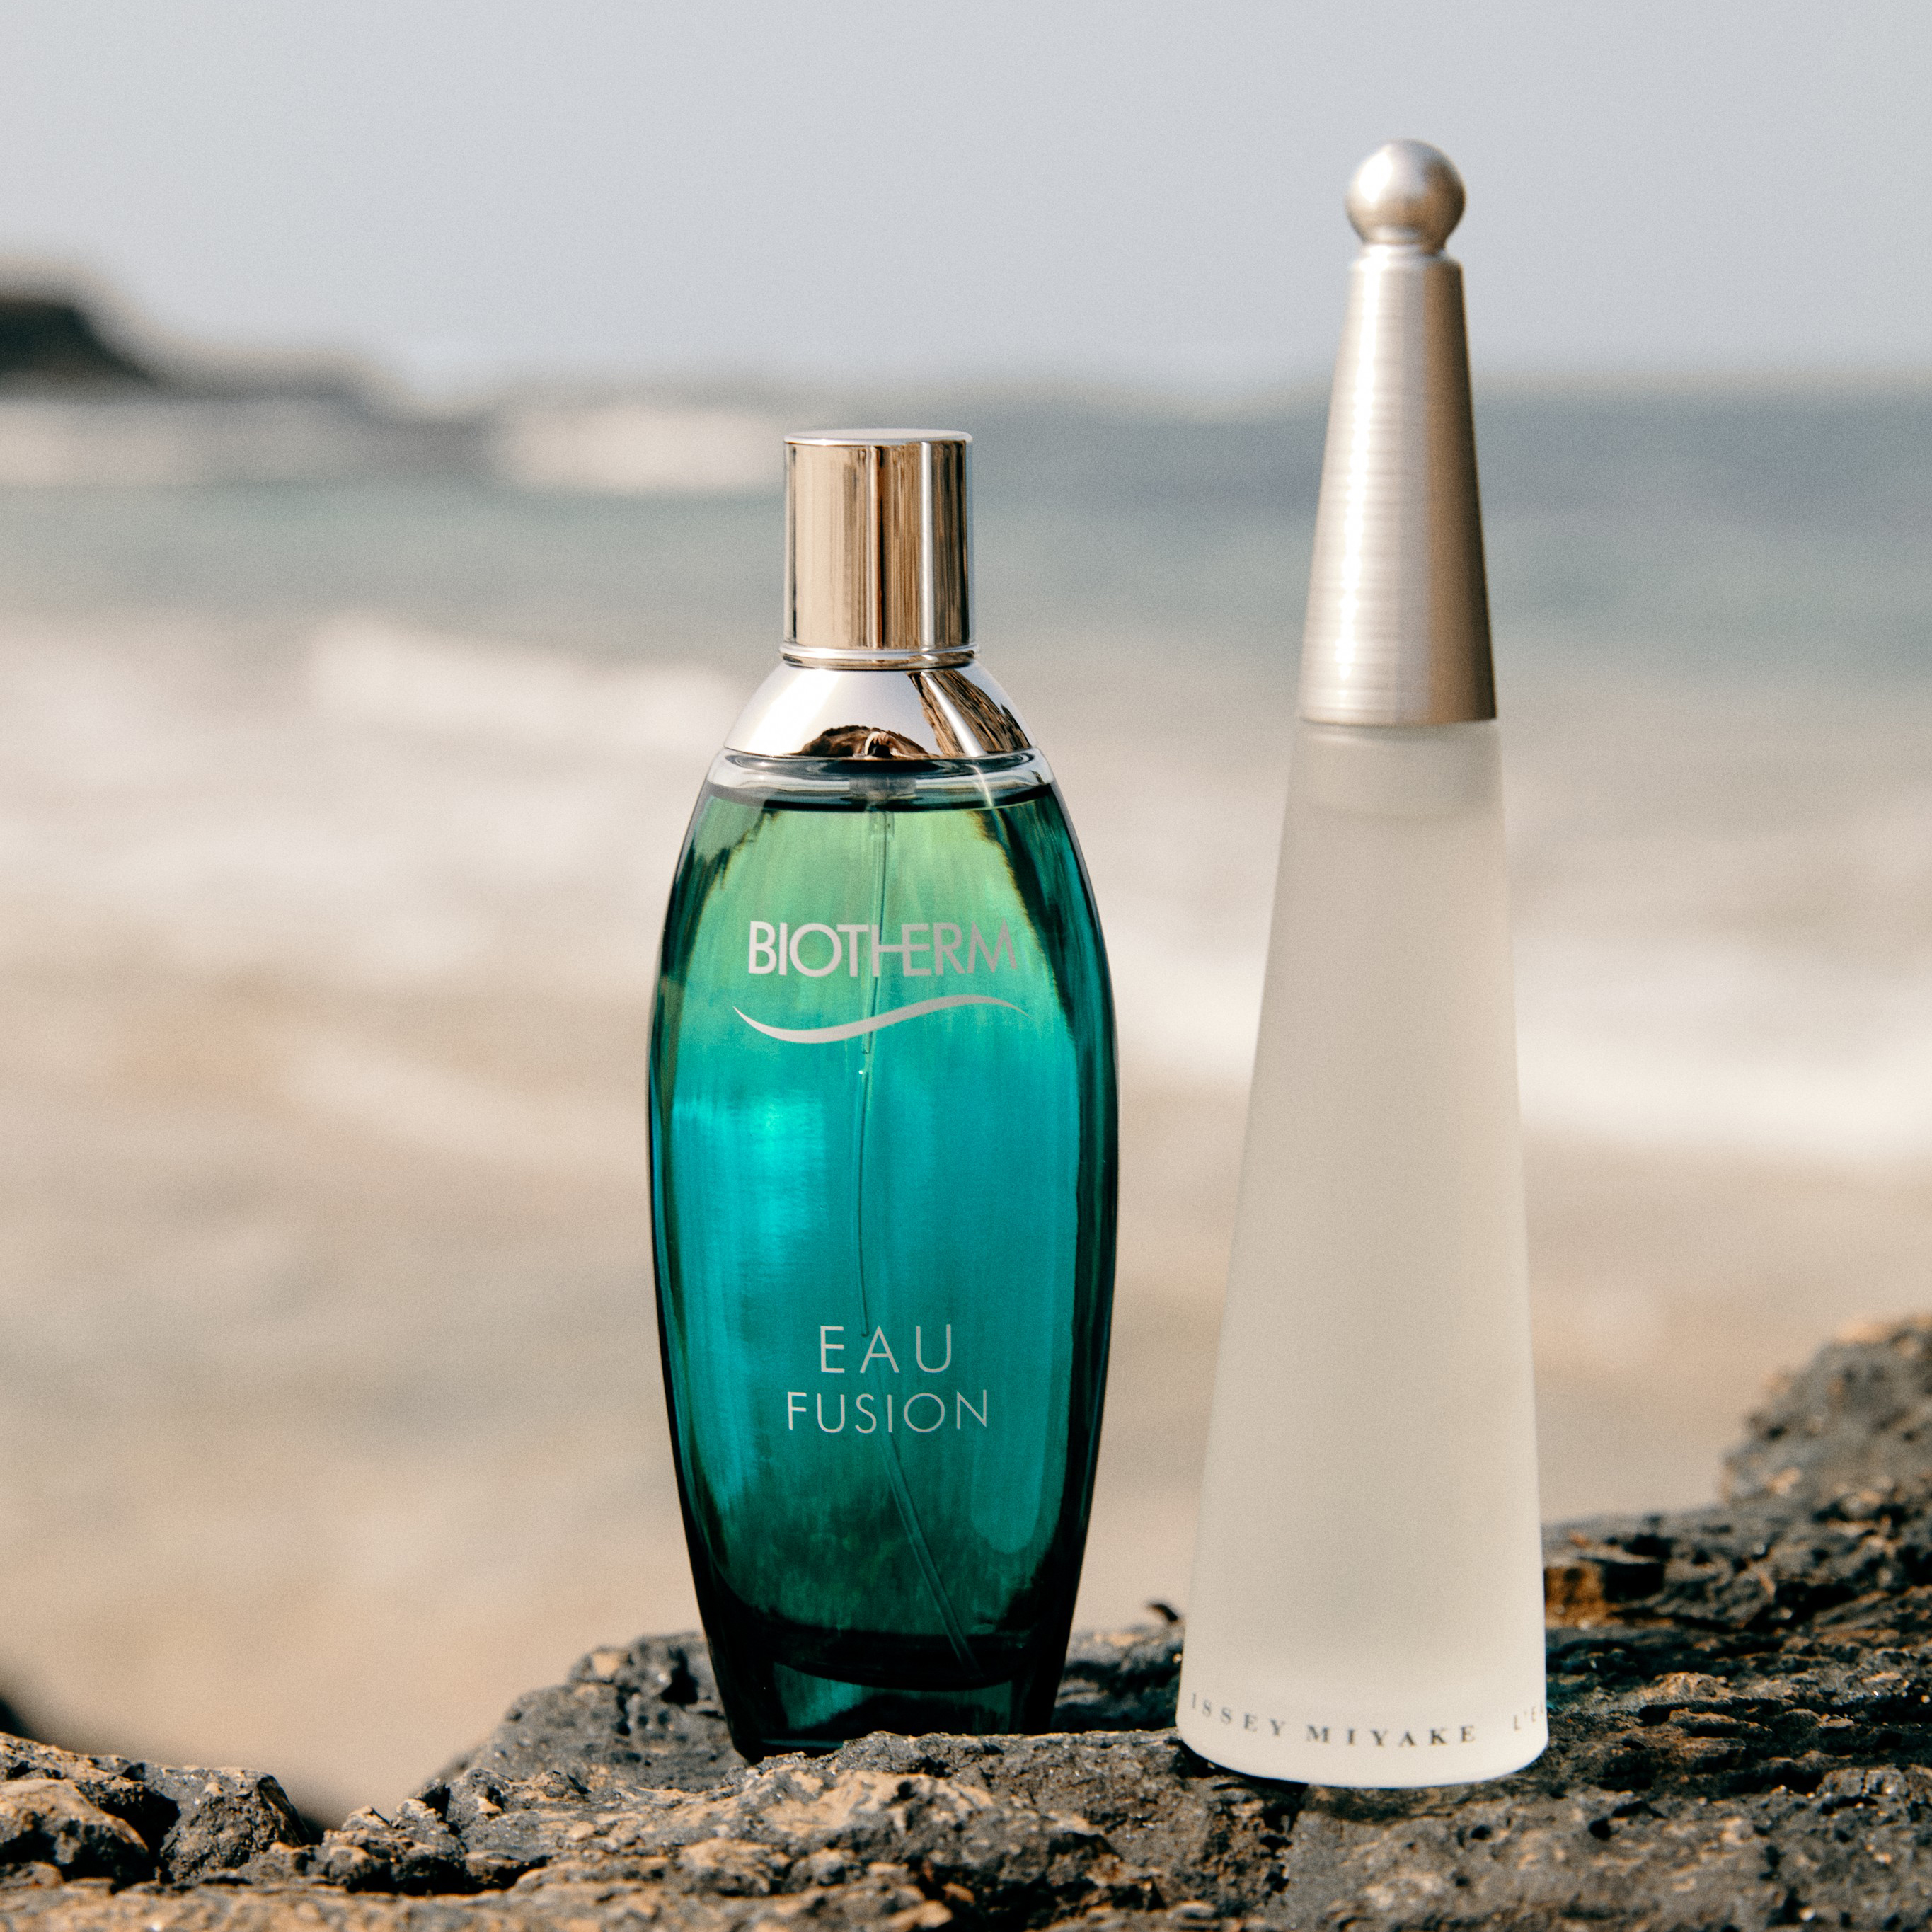 Fragrance-product-beach-biotherm-isseymiyake-unlimited-Web-Rendition